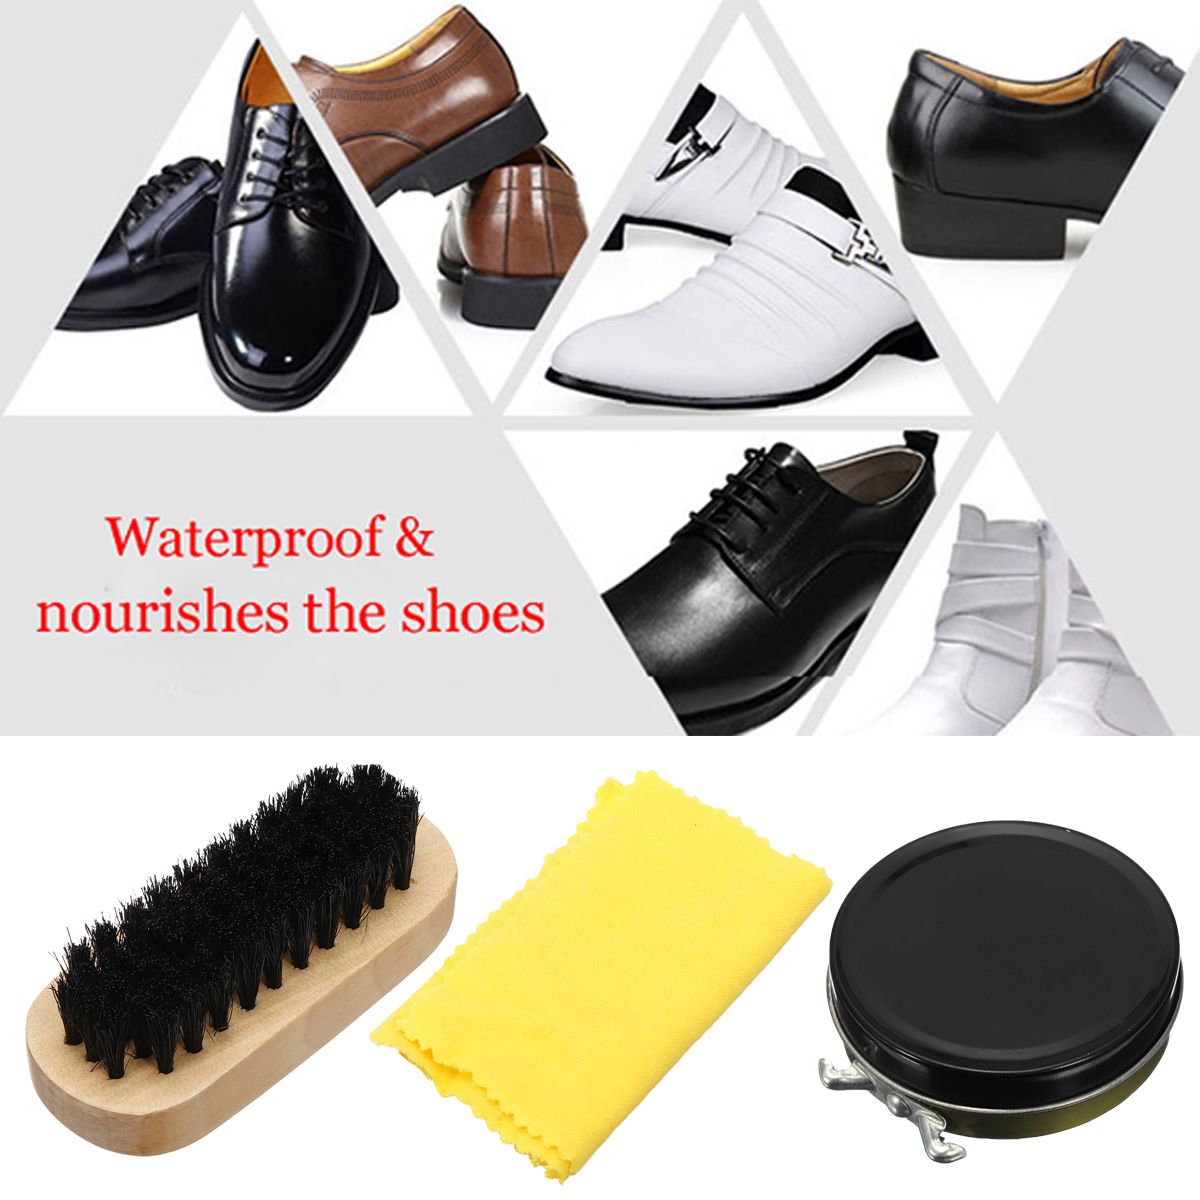 4-In-1-Shoe-Shine-Care-Kit-Set-Neutral-Polish-Brush-Leather-Shoes-Boots--Case-Shoes-Accessories-1278698